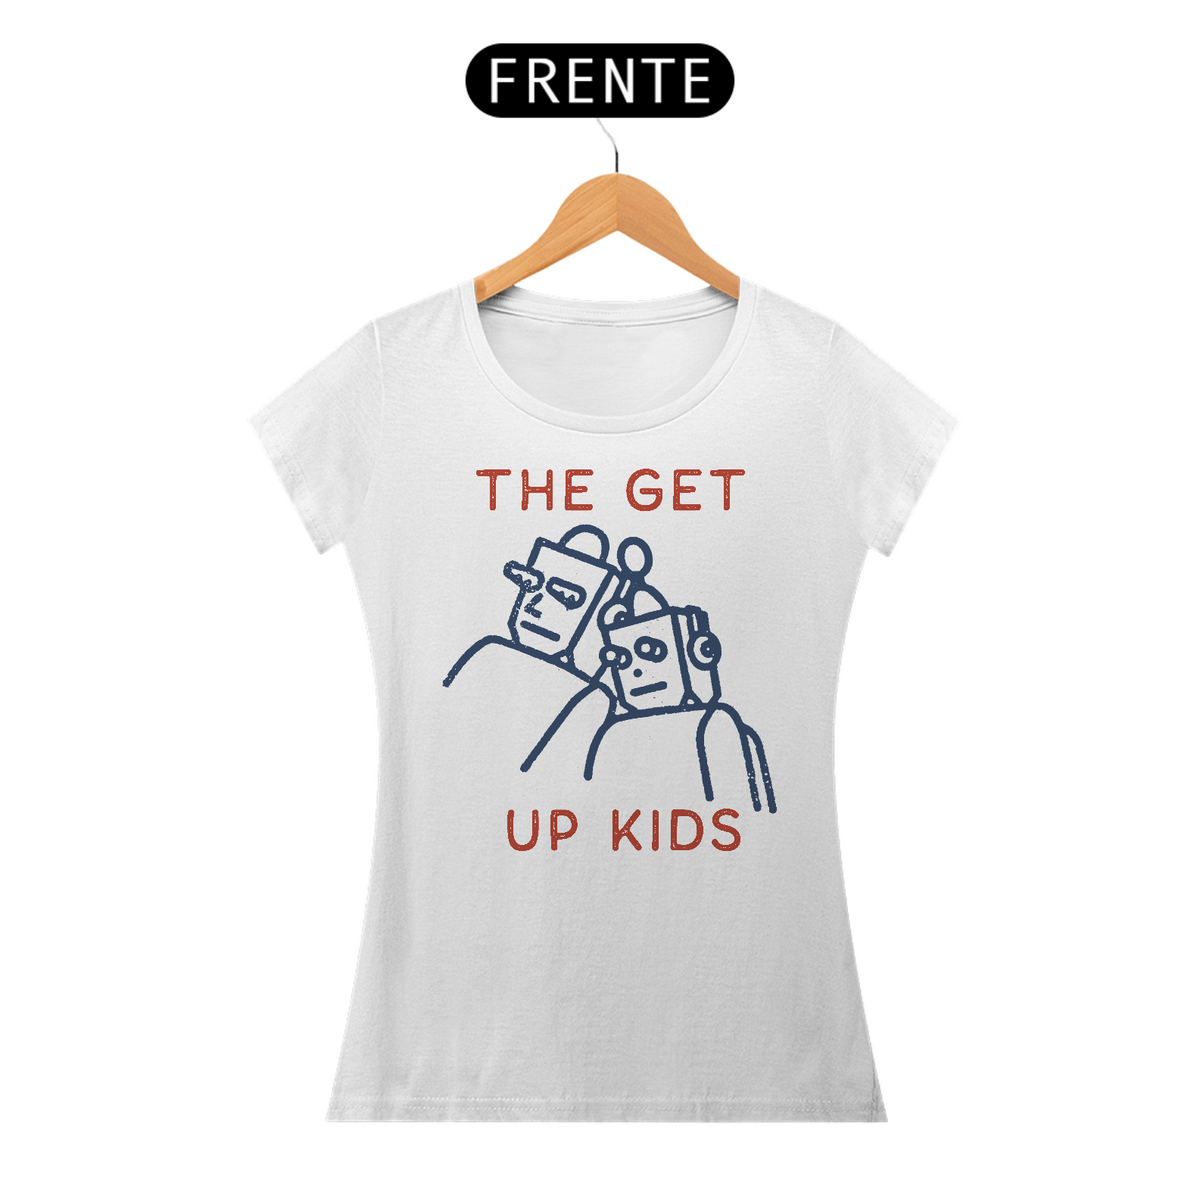 Nome do produto: The Get Up Kids - Baby Look